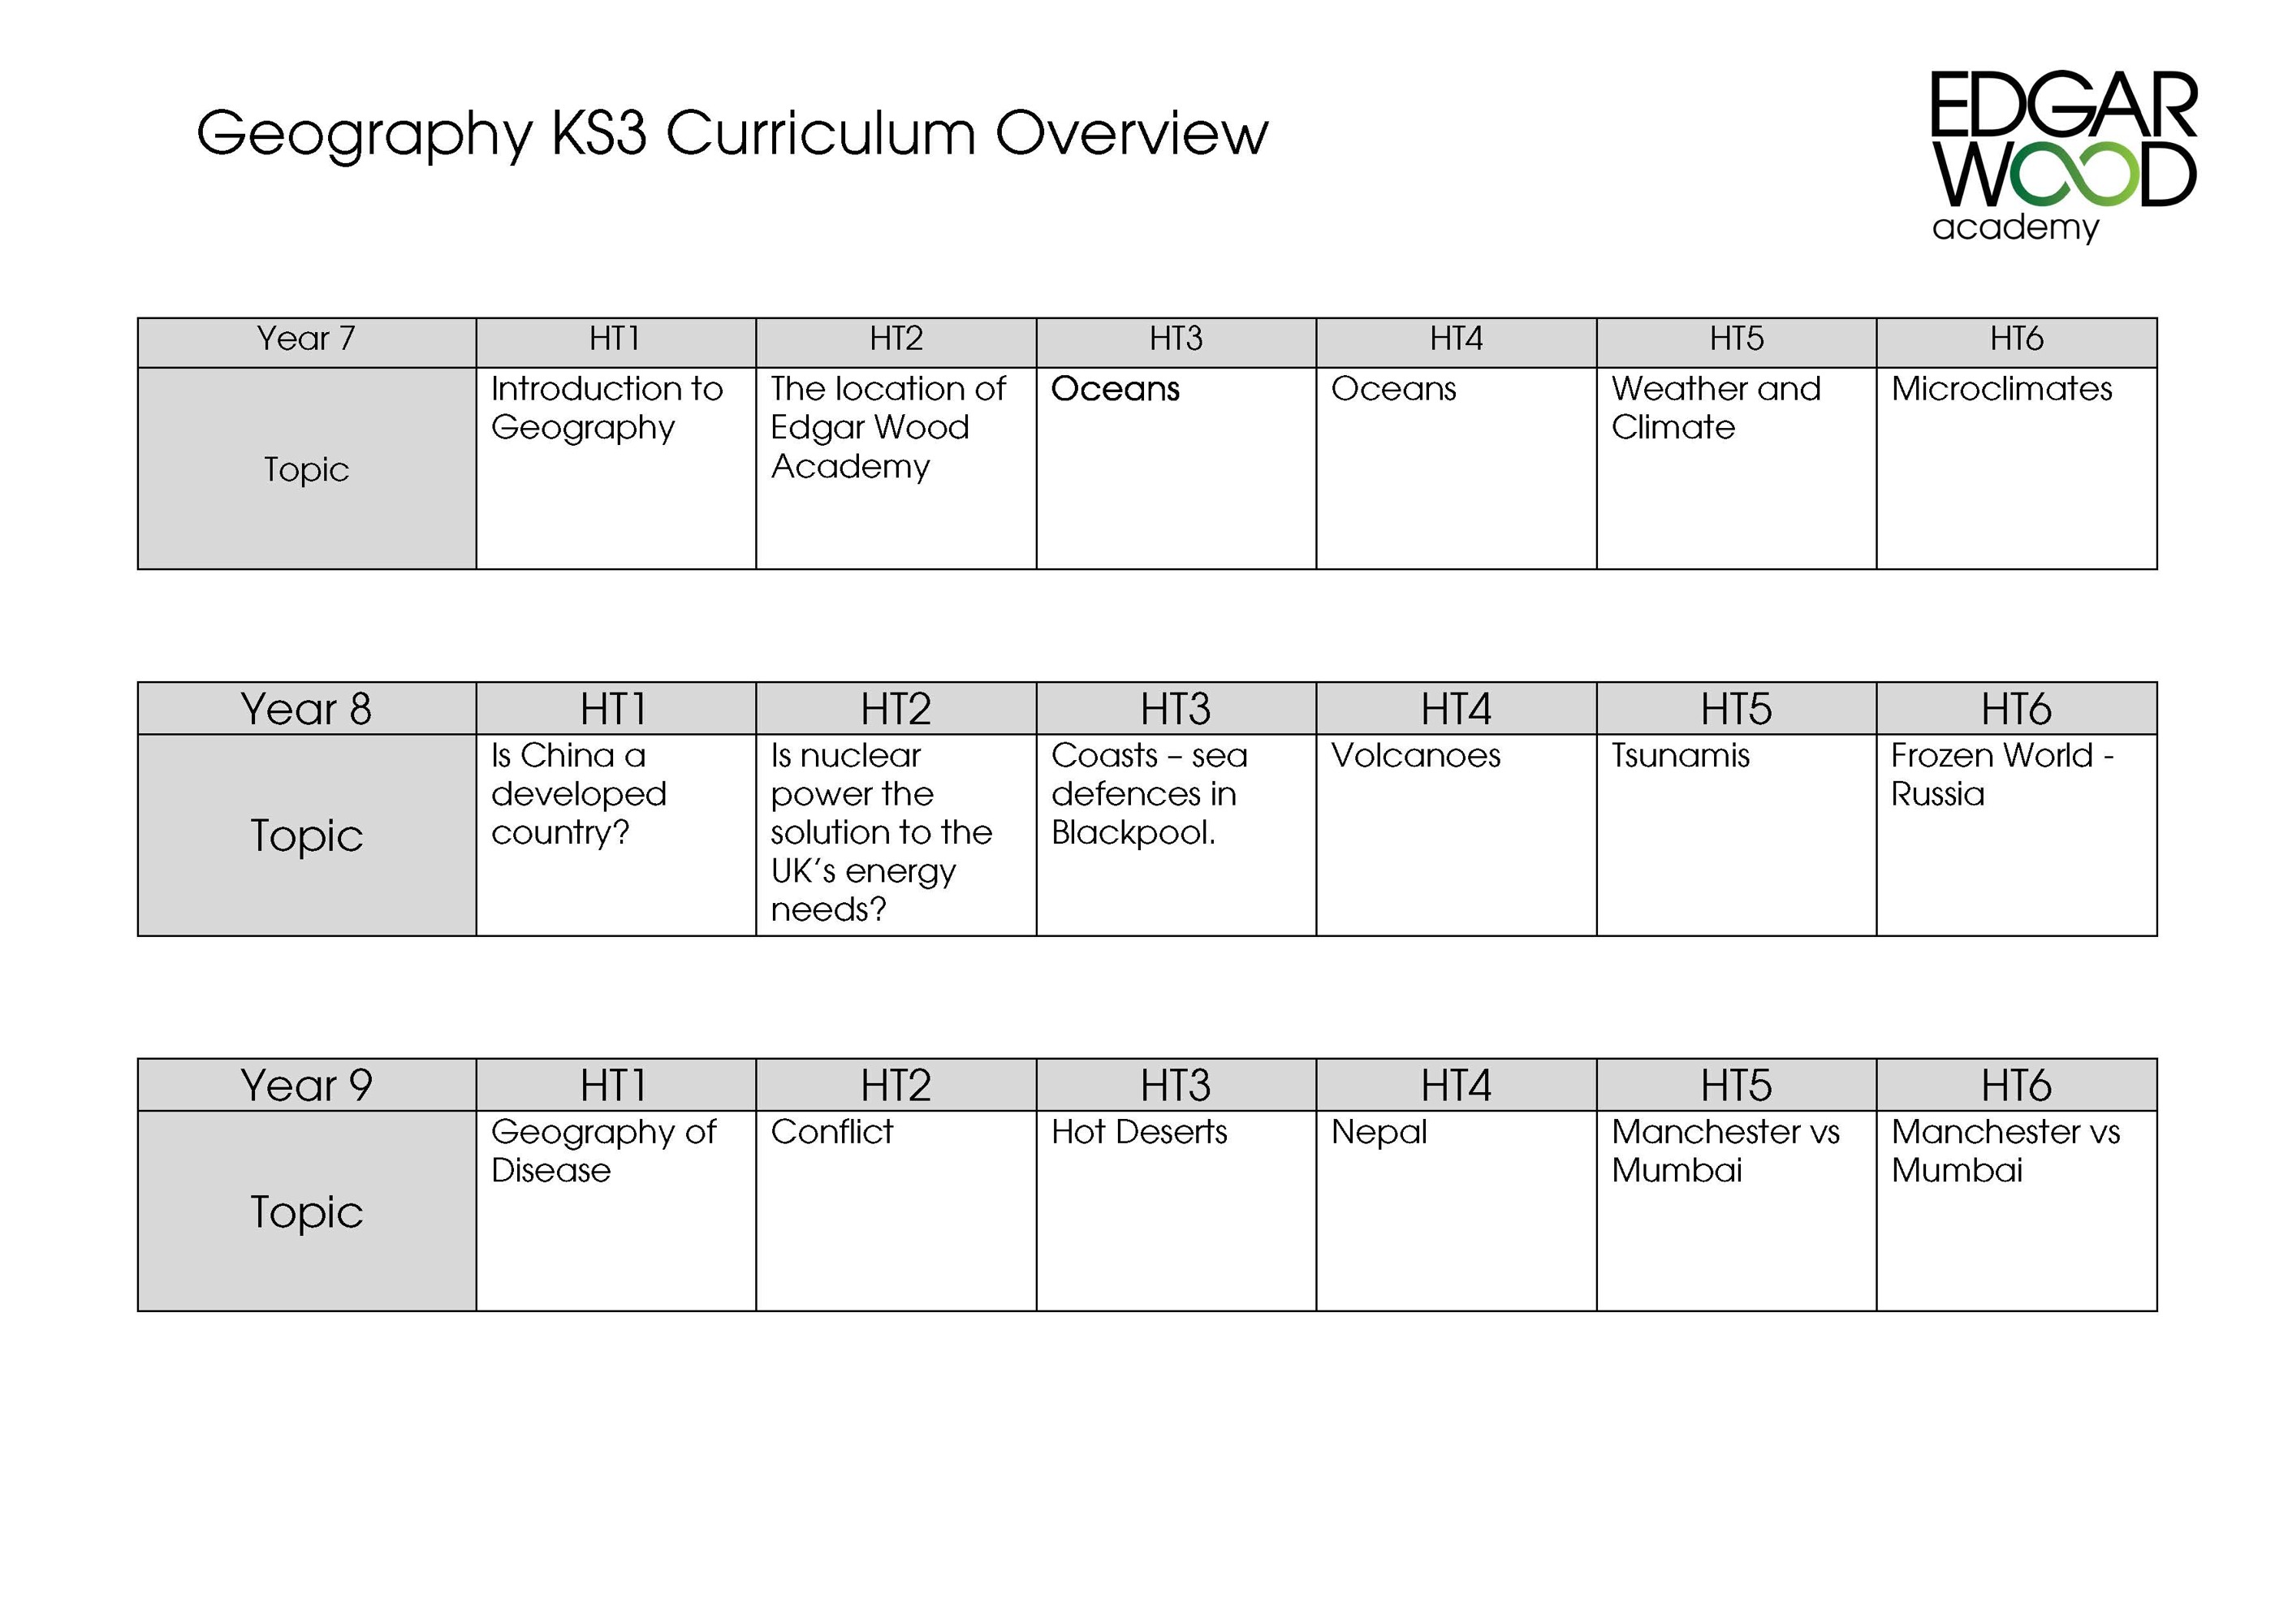 Geography Curriculum Overview